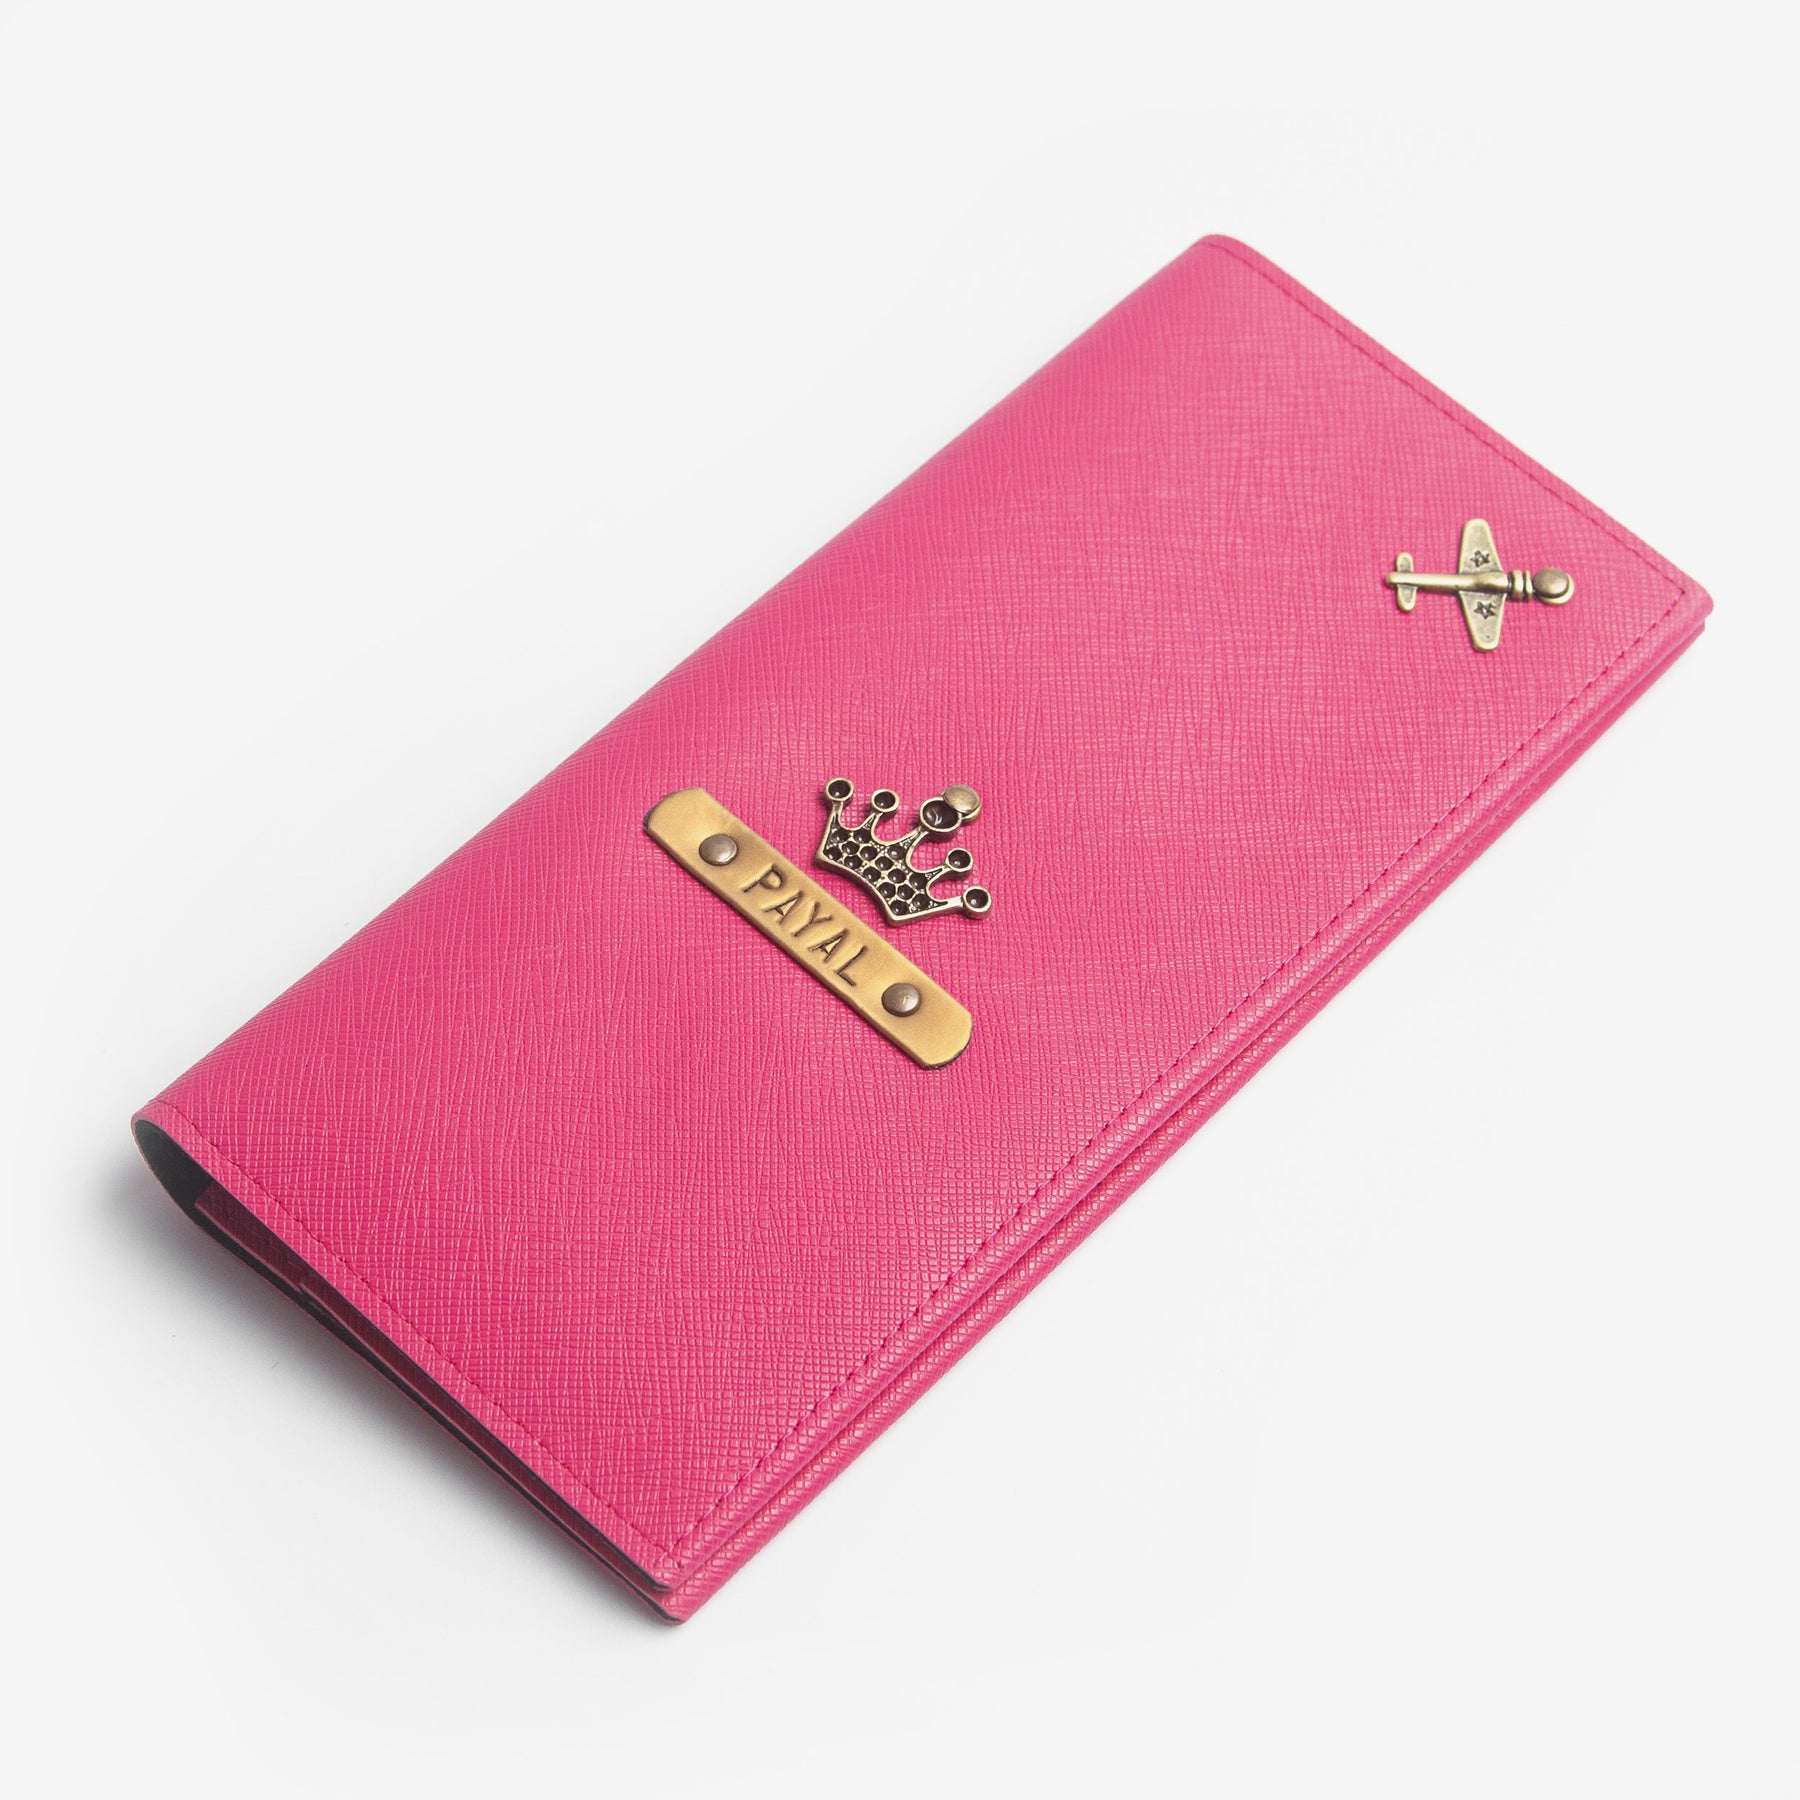 The Messy Corner Travel Wallet Personalized Travel Wallet - Pink